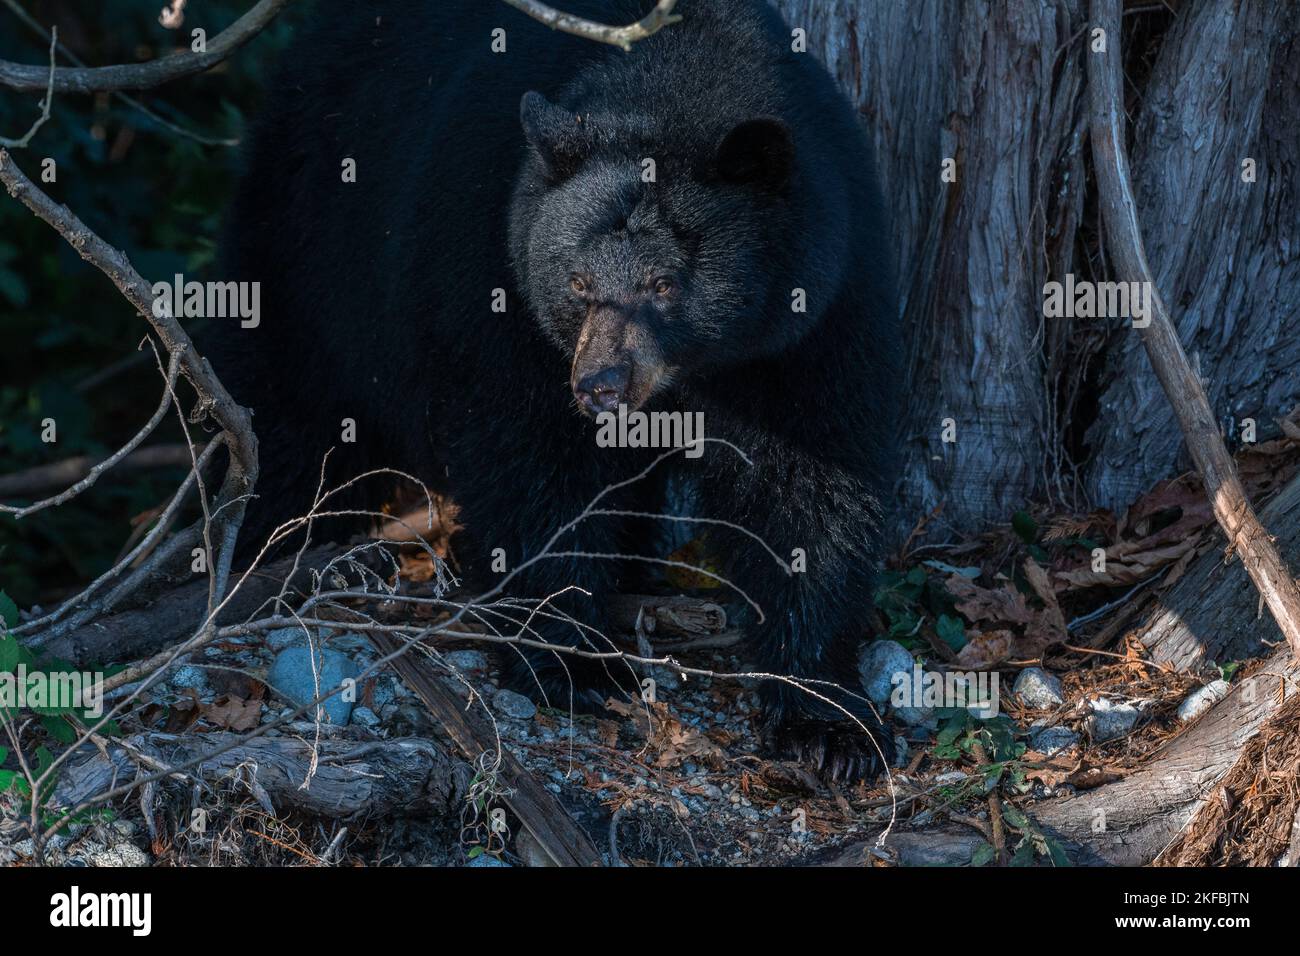 A cute little black bear cub hiding in the shade under a huge old tree in a sunny forest Stock Photo